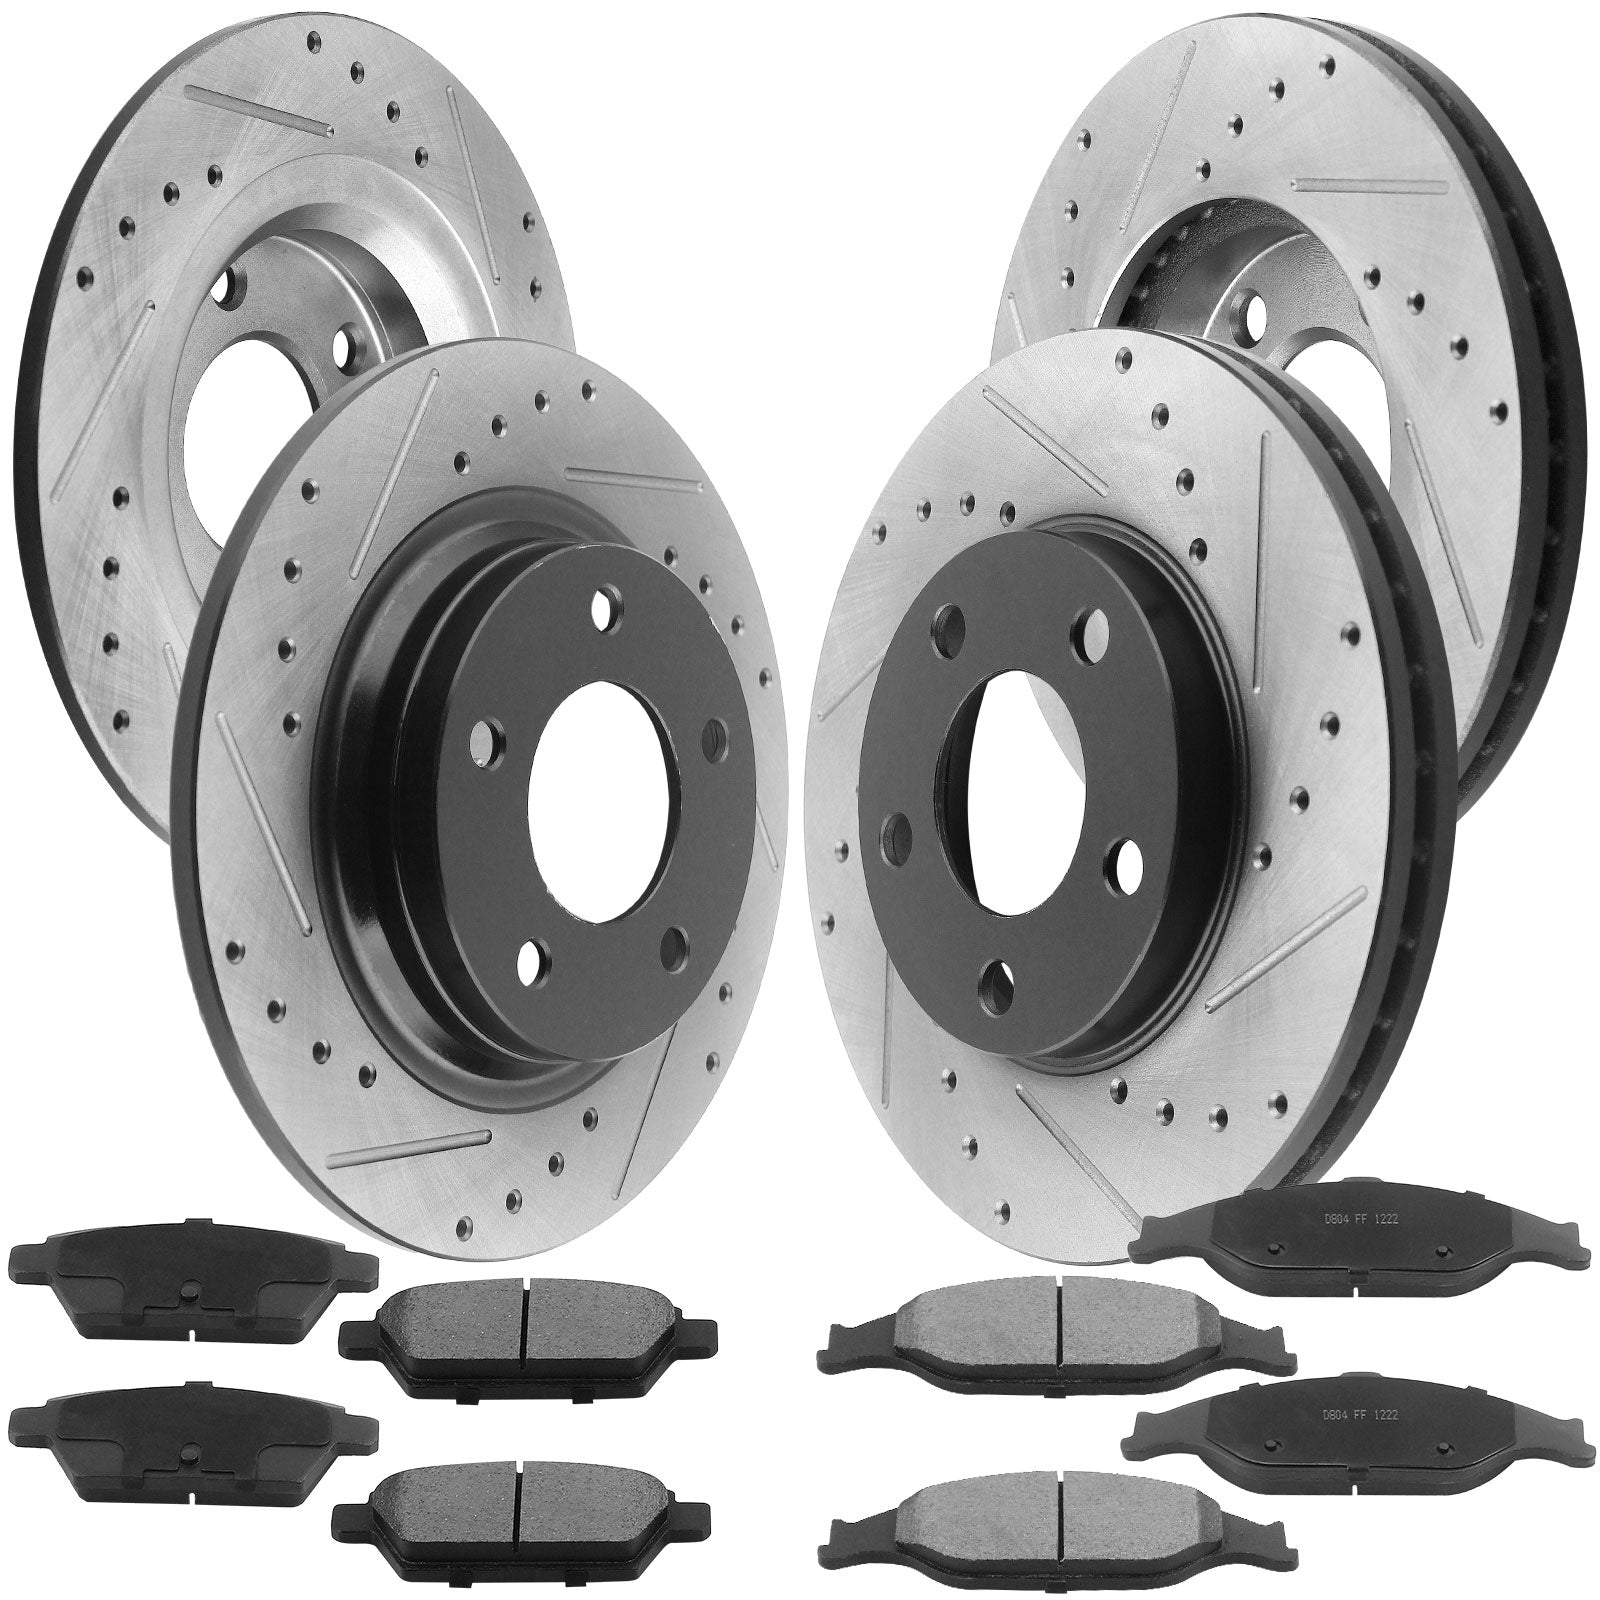 Front Rear Drilled & Slotted Brake Rotors + Ceramic Brake Pads + Cleaner & Fluid Fit for 1999 2000 2001 2002 2003 2004 Ford Mustang, 5 Lugs(Bolts Not Included)-54011 54017 MotorbyMotor